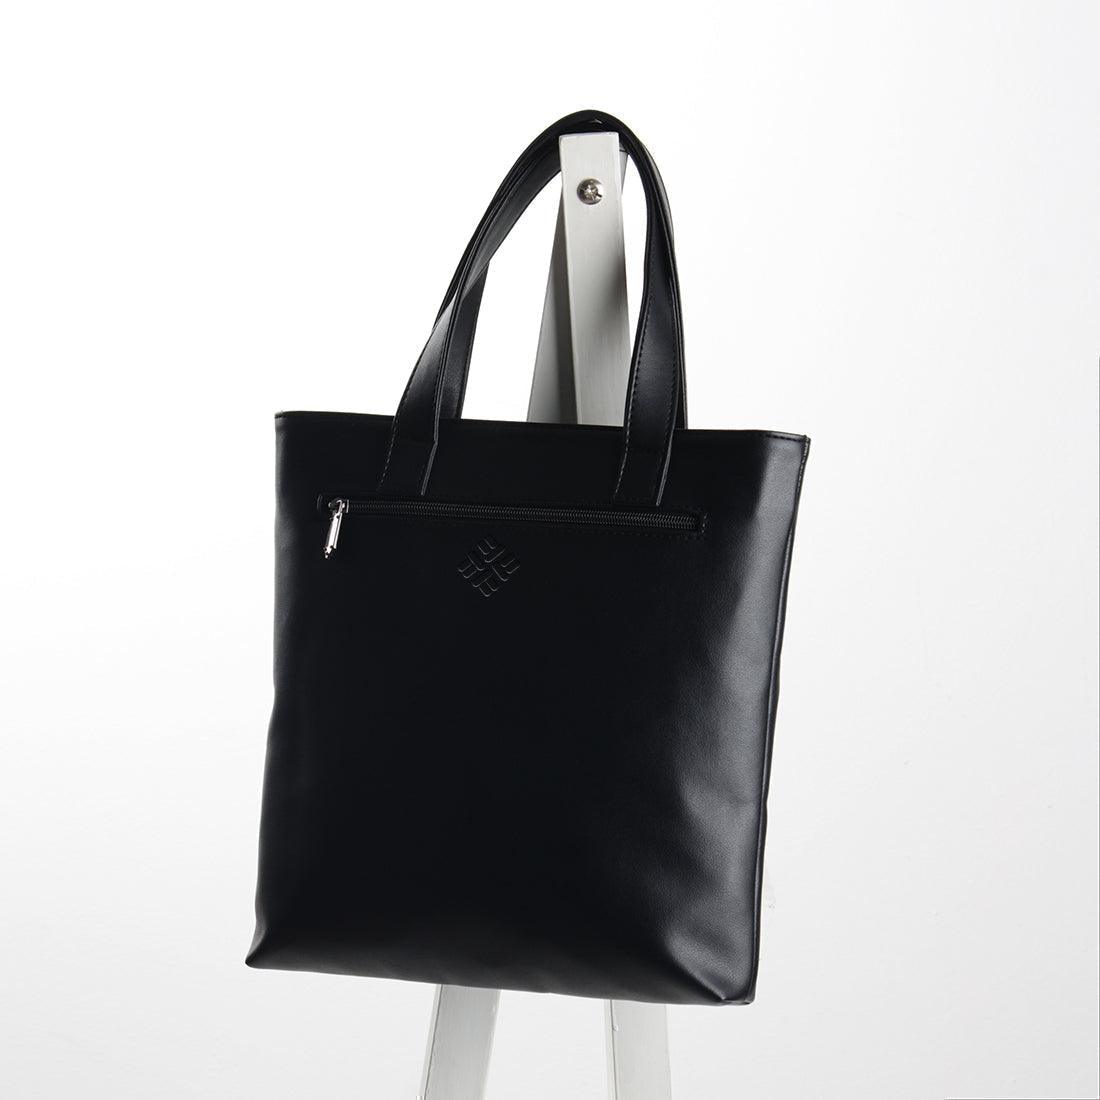 Leather Tote bag Pattern